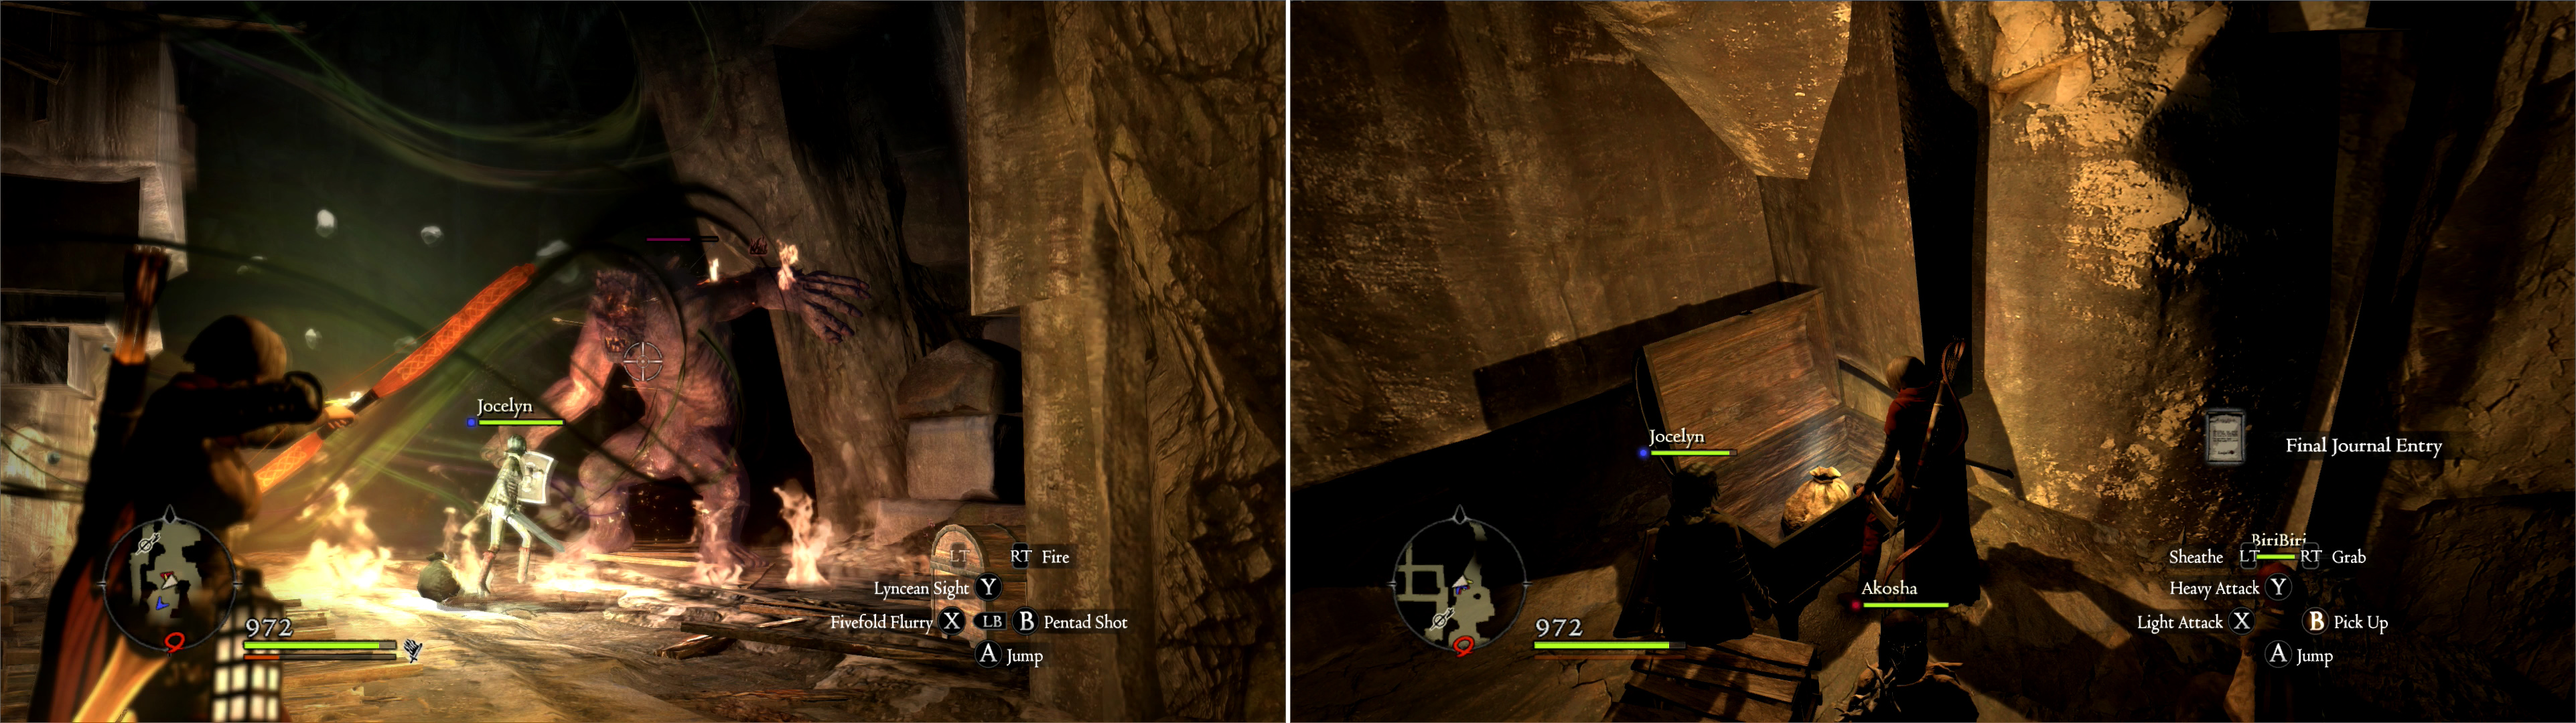 The real threat inside these mines are a trio of Ogres, the first of which (left) guards a pressure plate that opens a gate leading ot the rest of the quarry. After dealing with the first Ogre, loot a rounded chest to find the Final Journal Entry (right).